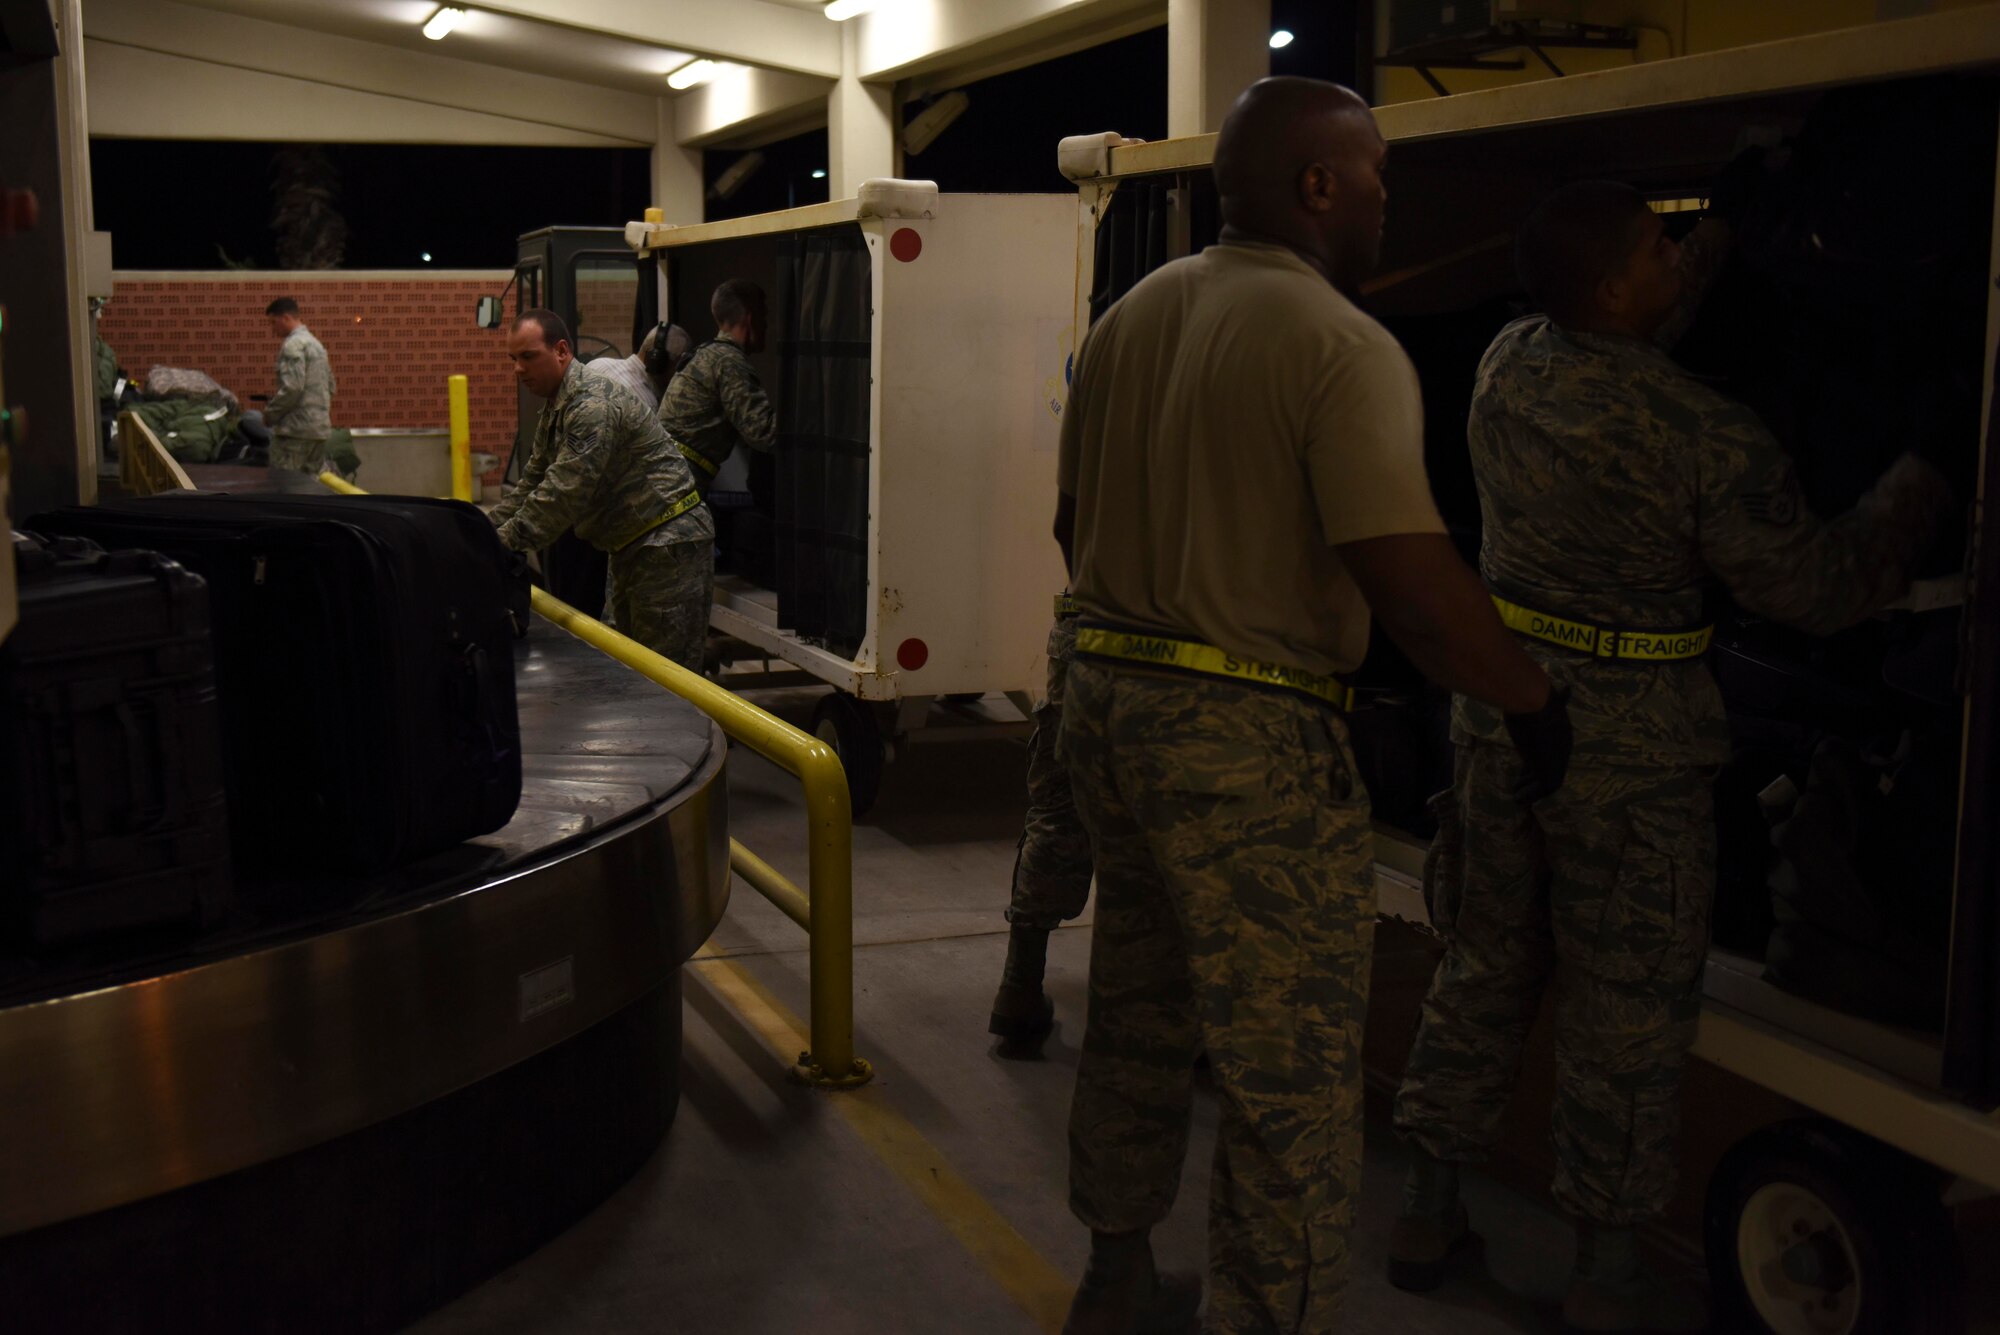 U.S. Air Force Airmen assigned to the 728th Air Mobility Squadron, unload a baggage cart July 13, 2016, at Incirlik Air Base, Turkey. Freight Airmen are responsible for loading and unloading aircraft that fly into Incirlik. (U.S. Air Force photo by Airman 1st Class Devin M. Rumbaugh)